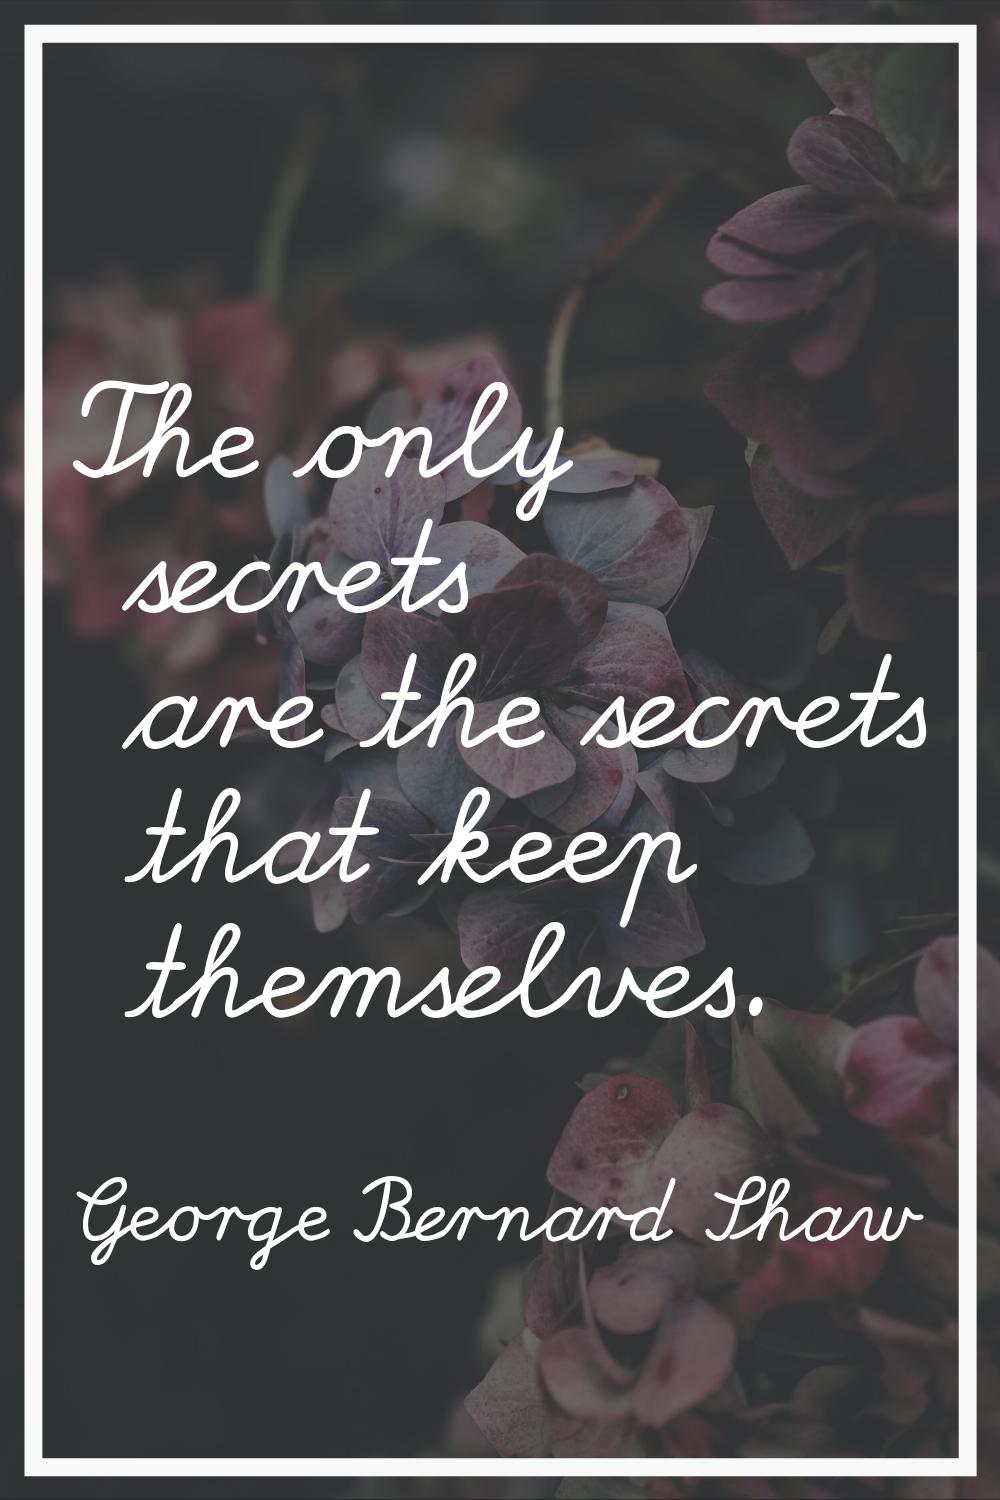 The only secrets are the secrets that keep themselves.